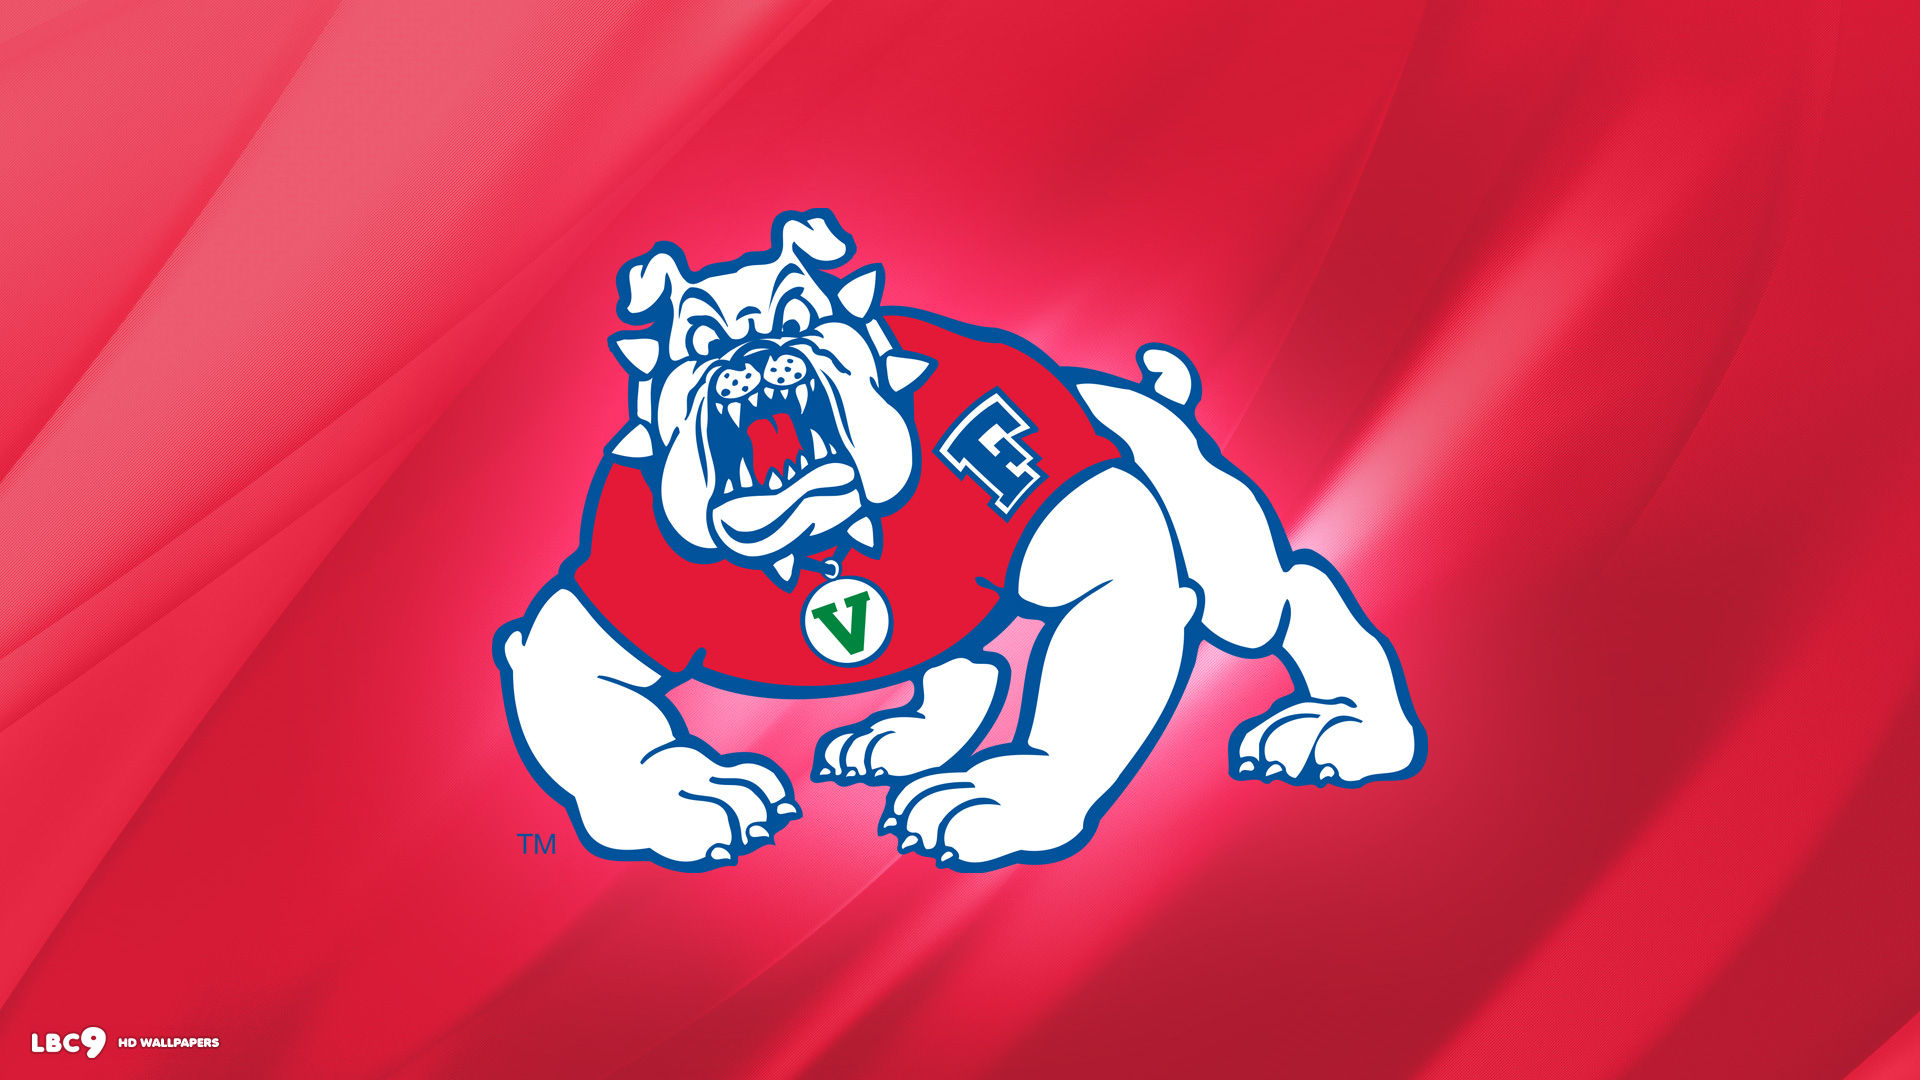 Fresno state bulldogs wallpaper 1 / 2 college athletics hd backgrounds